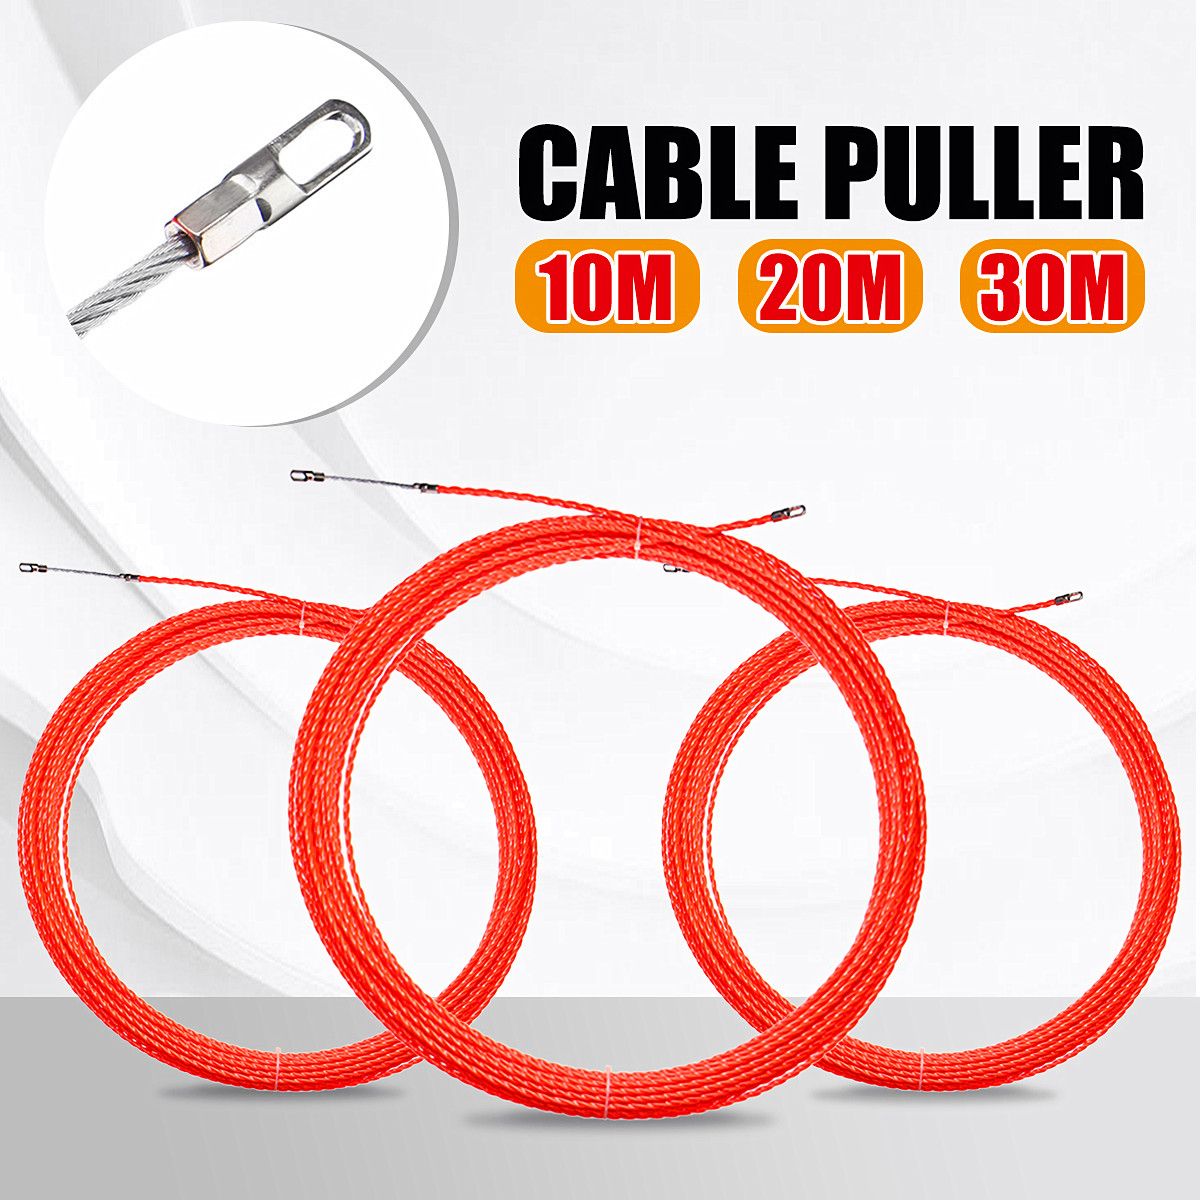 10M20M30M-Dia-5mm-Cable-Puller-Fish-Tape-Reel-Conduit-Ducting-Rodder-Pulling-Puller-1392079-1